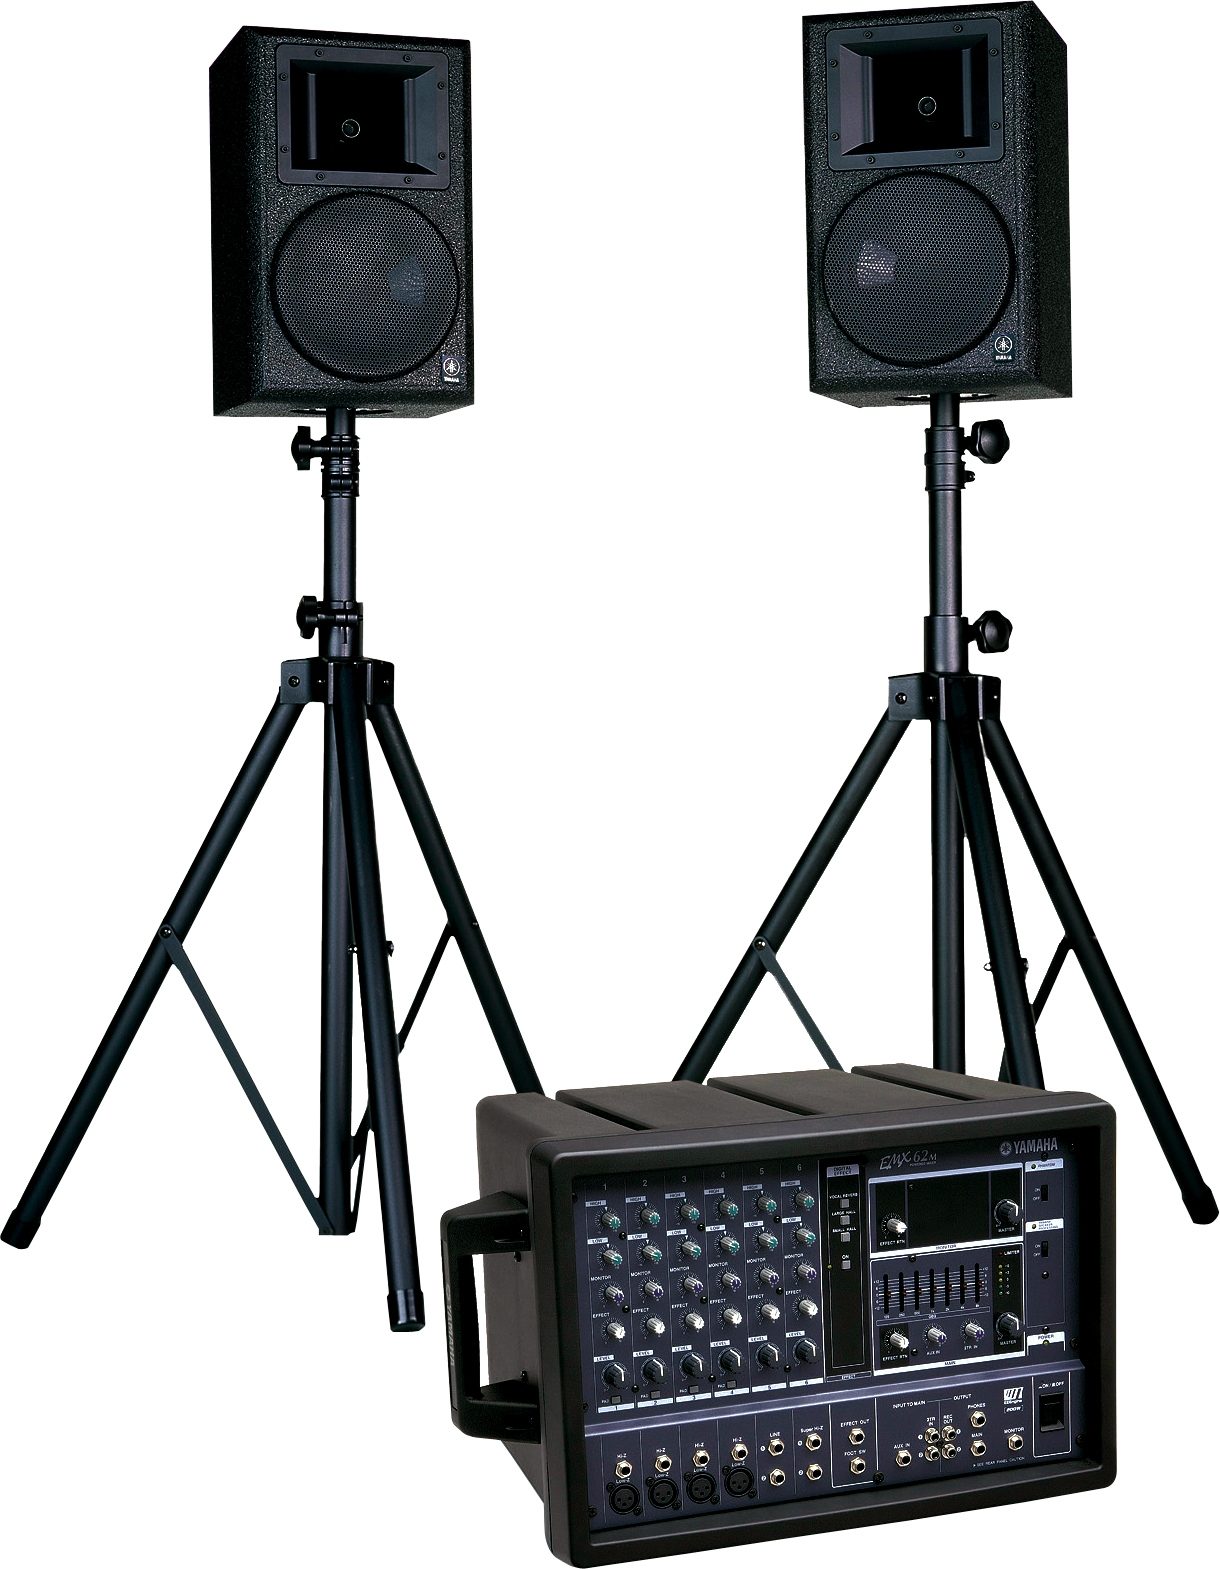 Yamaha EMX62M Package (EMX62M Powered Mixer, 2 AS108 Speakers)